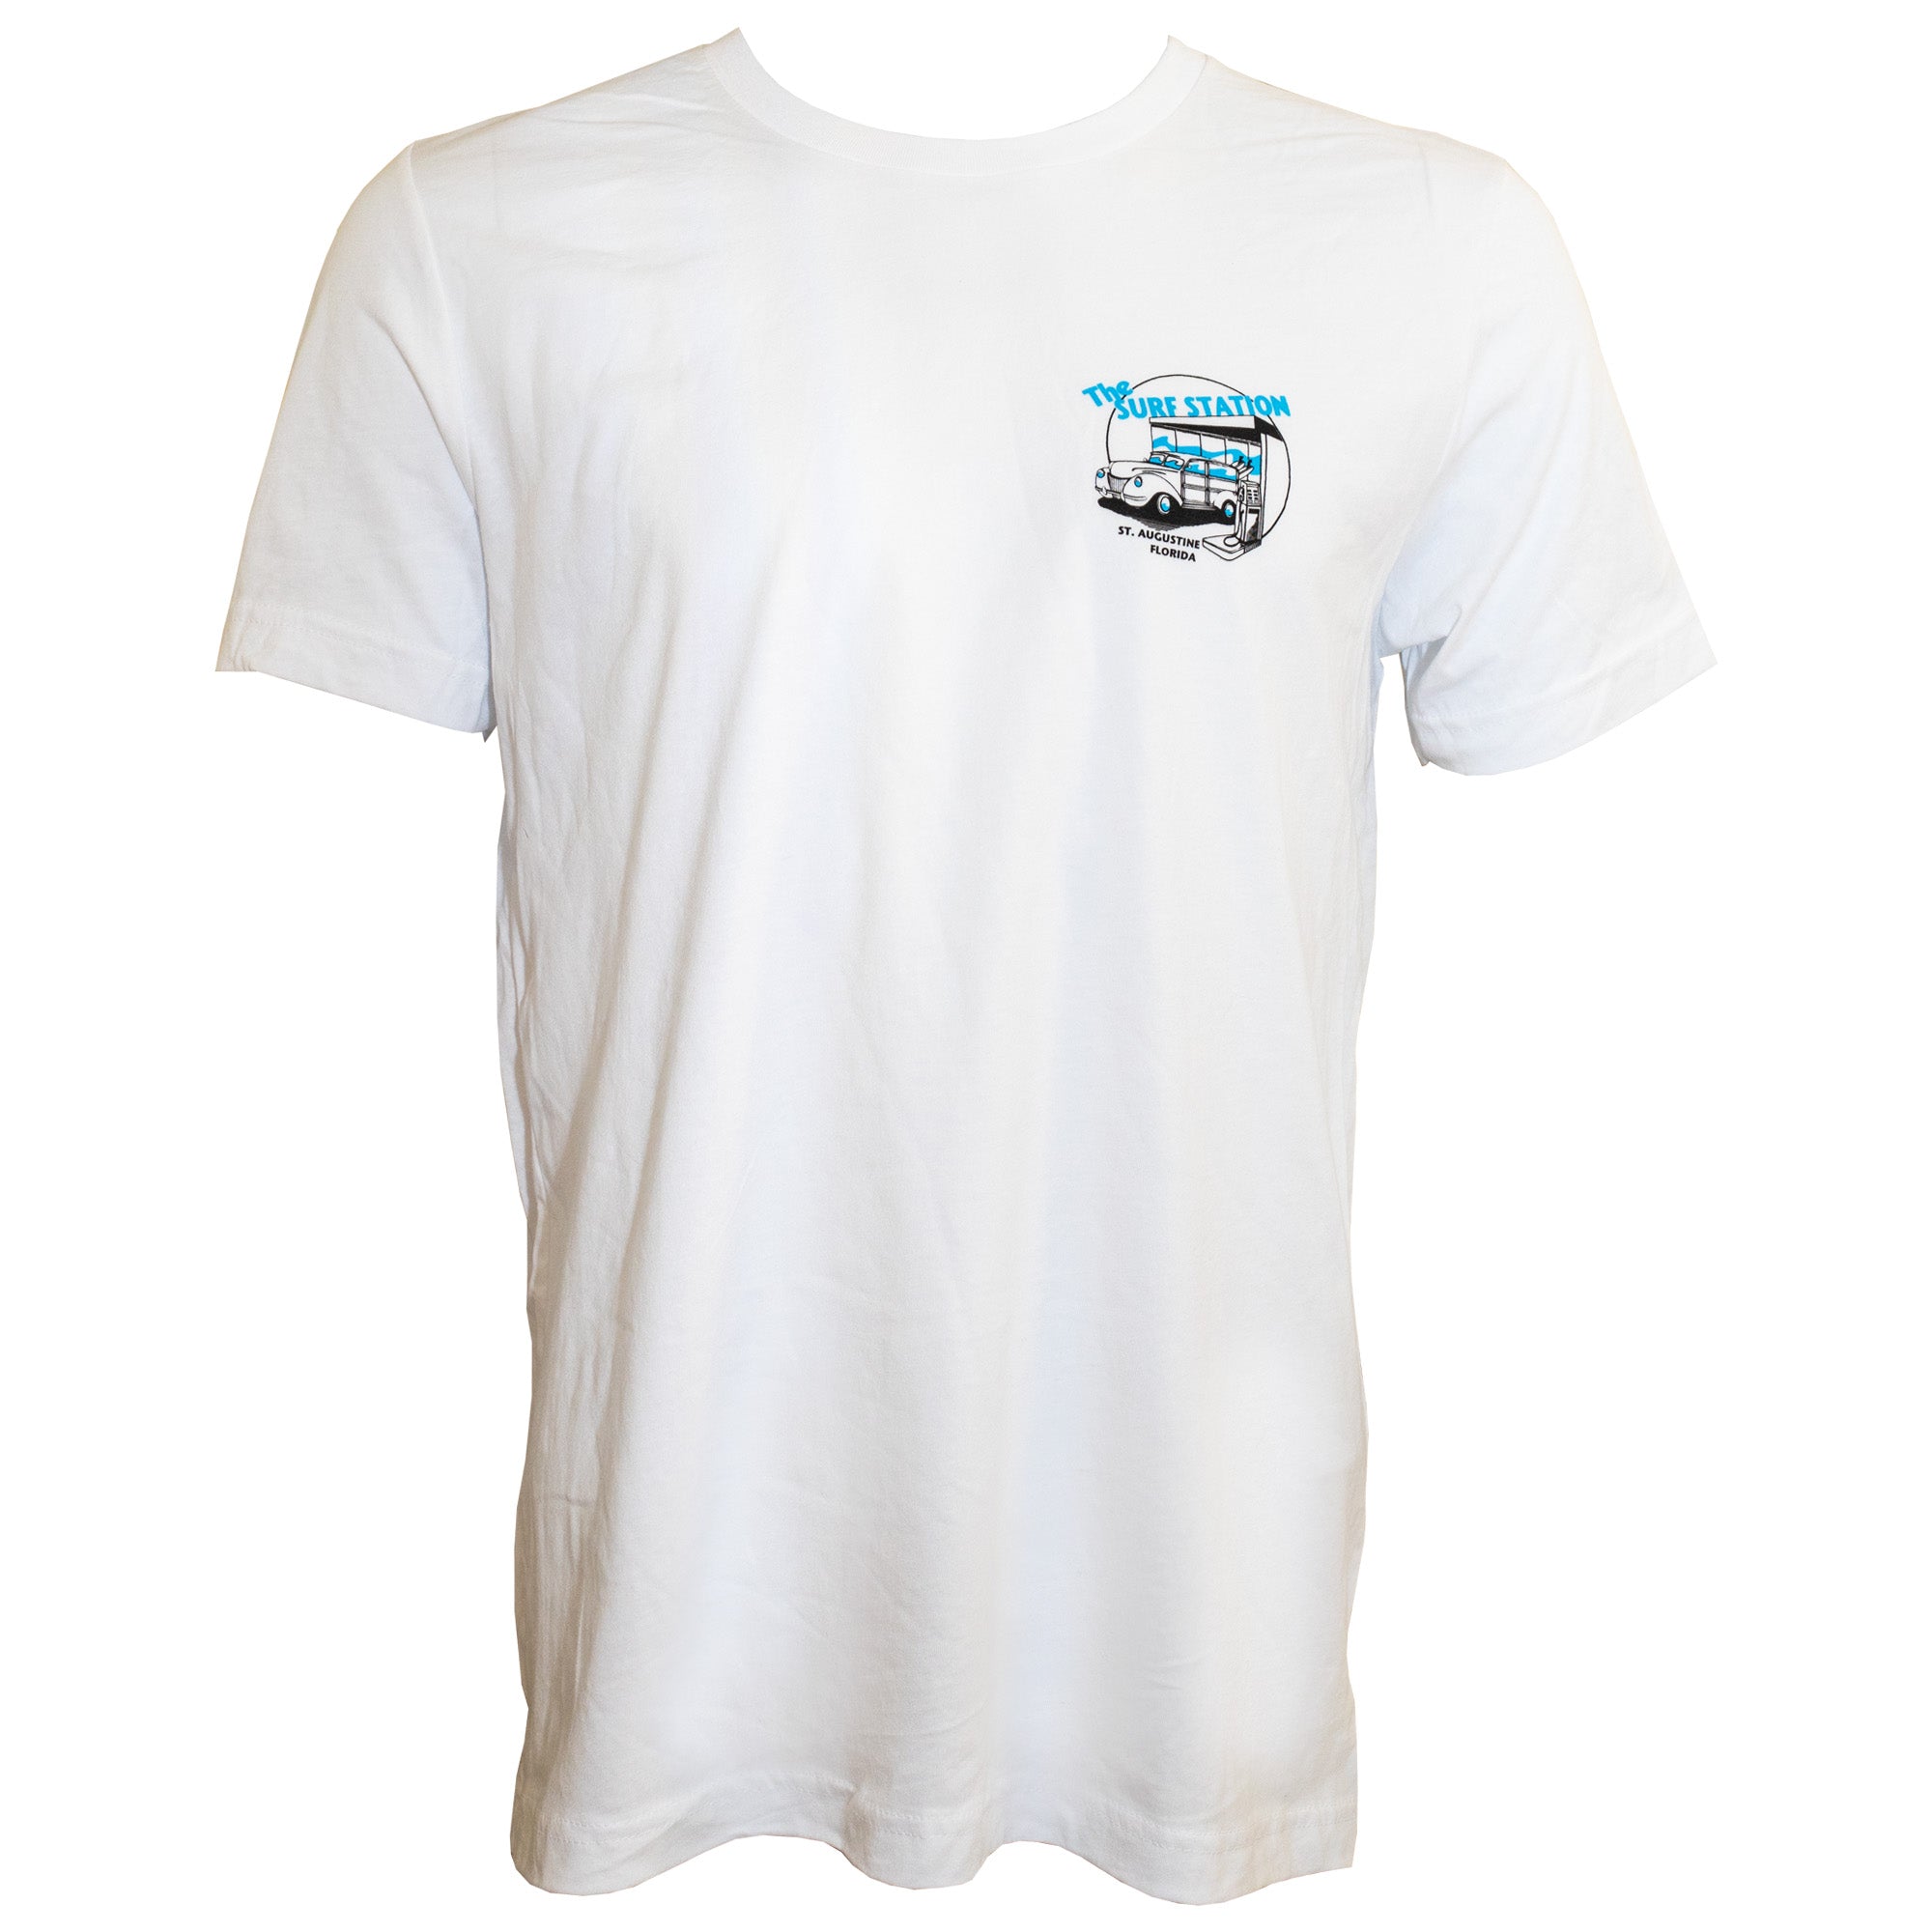 Surf Station Neon Woody Men's S/S T-Shirt